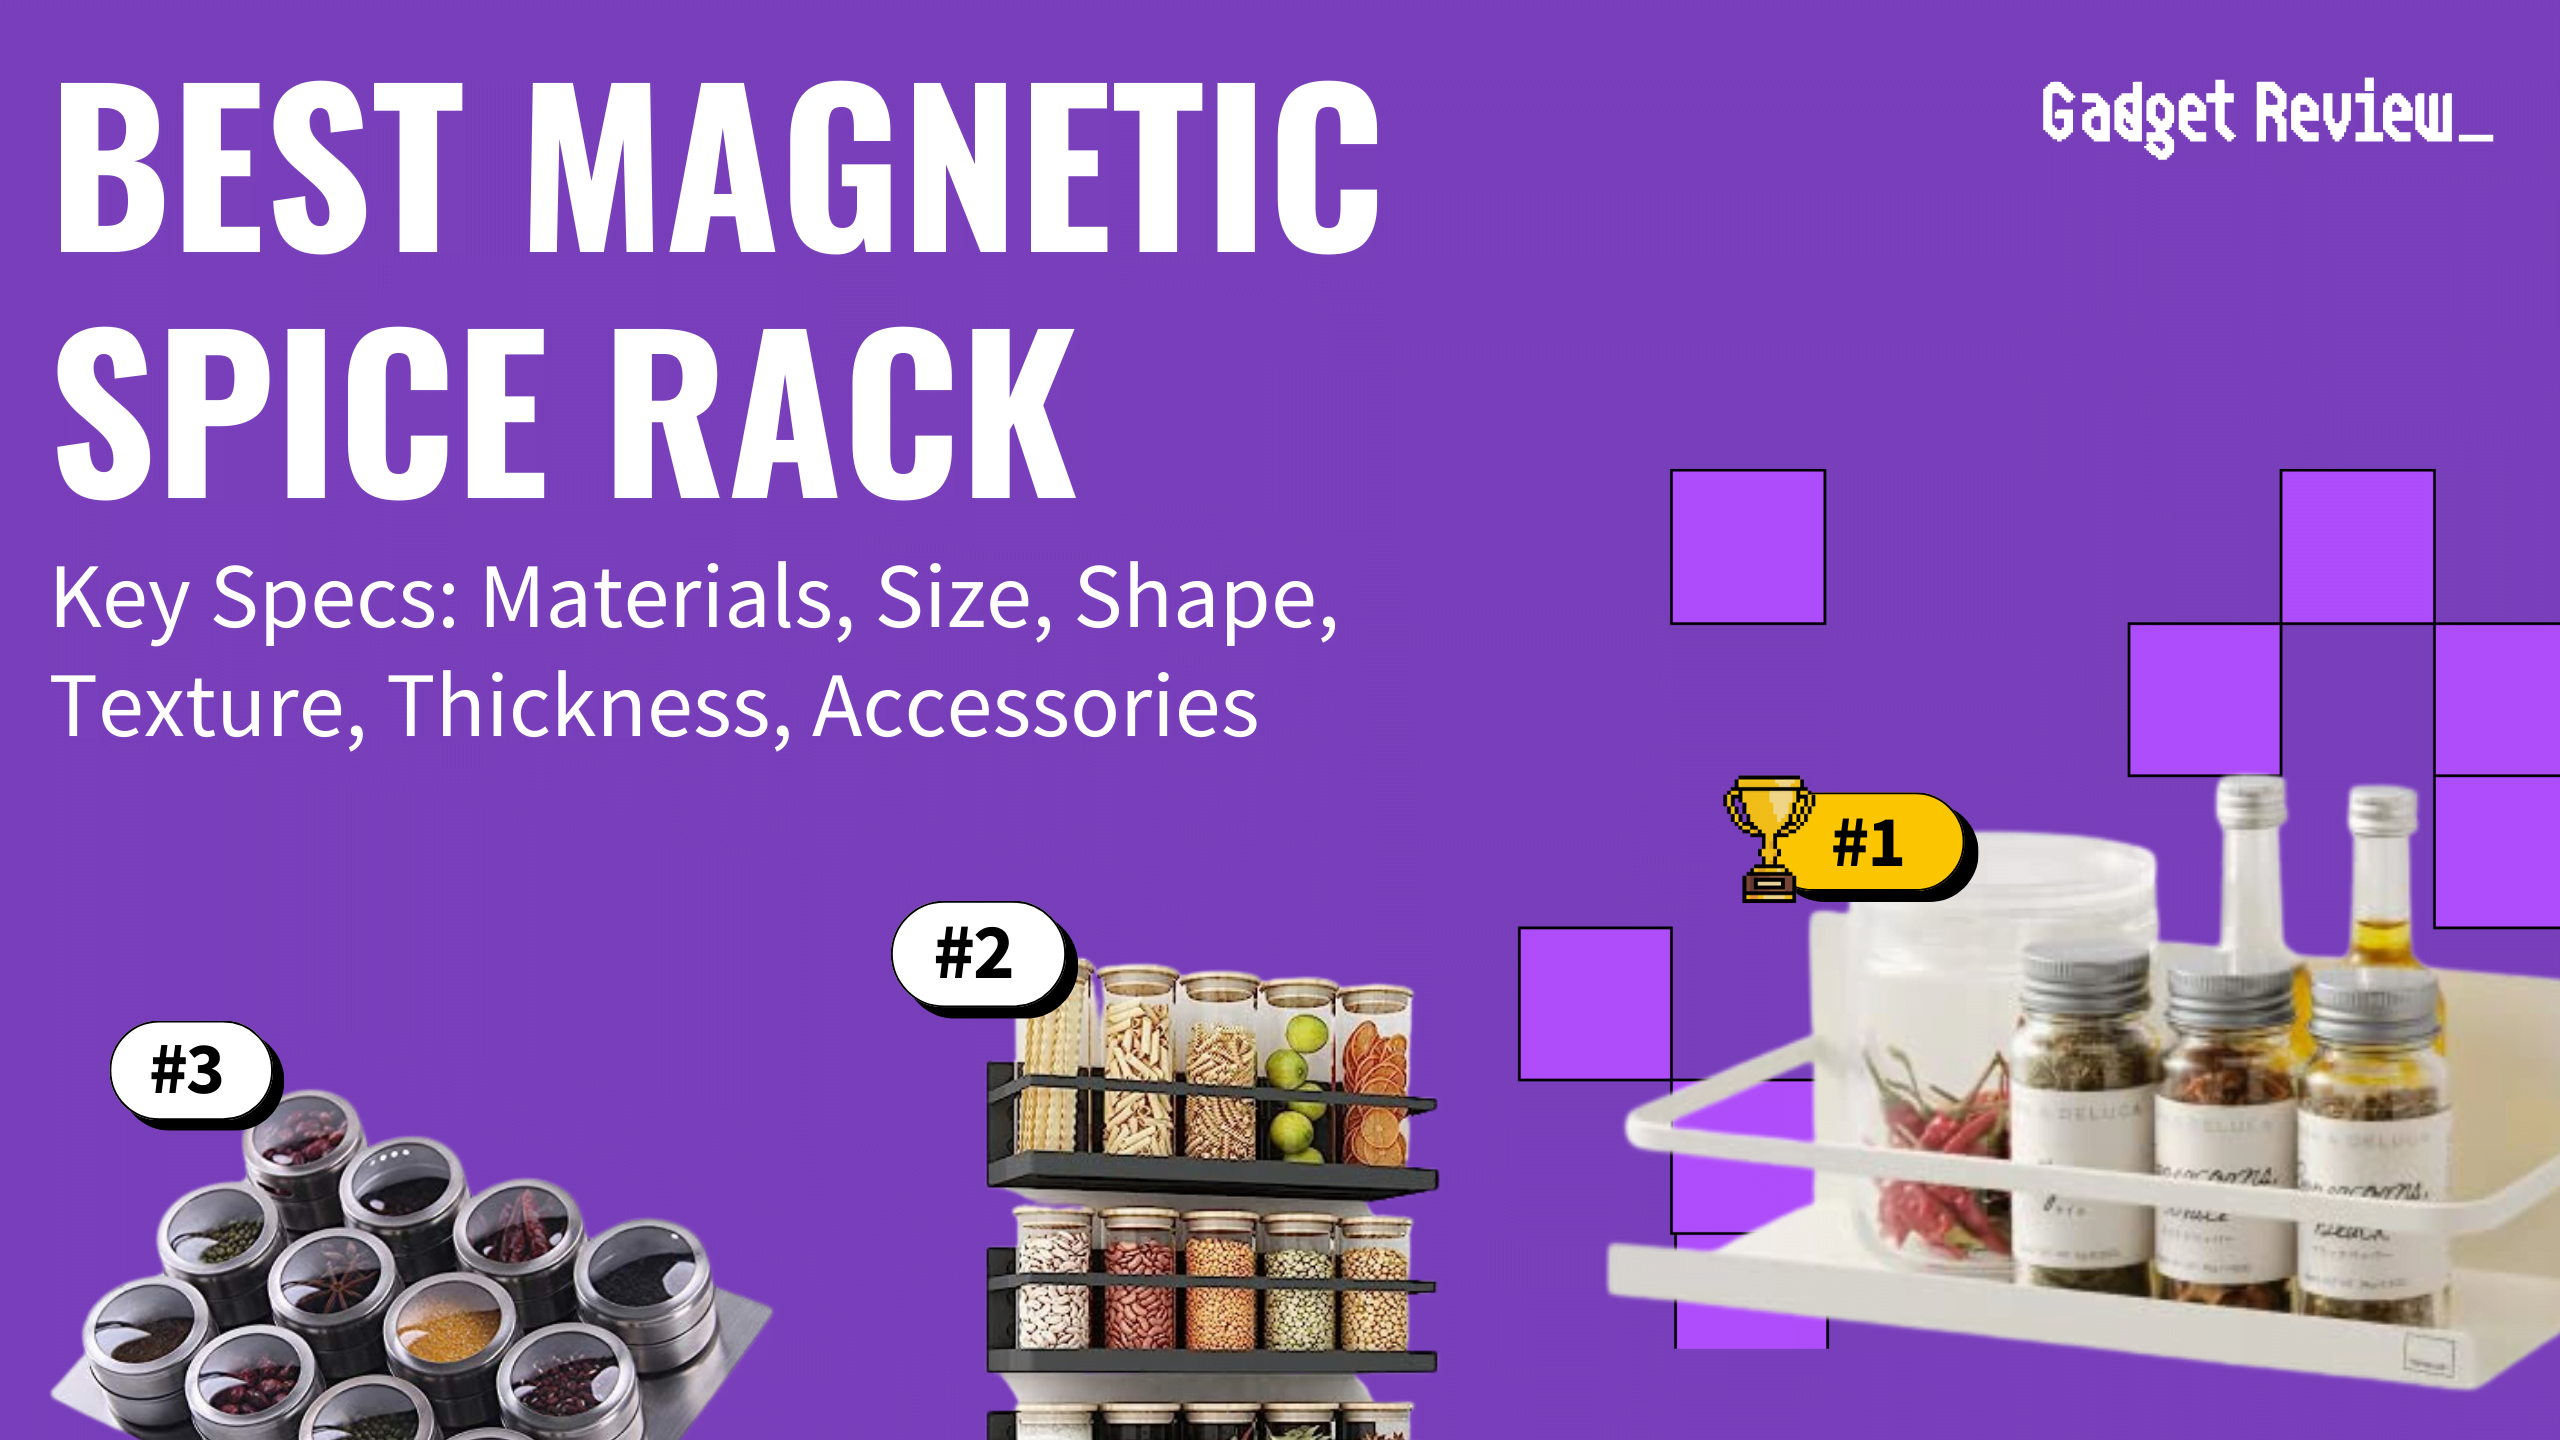 best magnetic spice rack featured image that shows the top three best kitchen product models